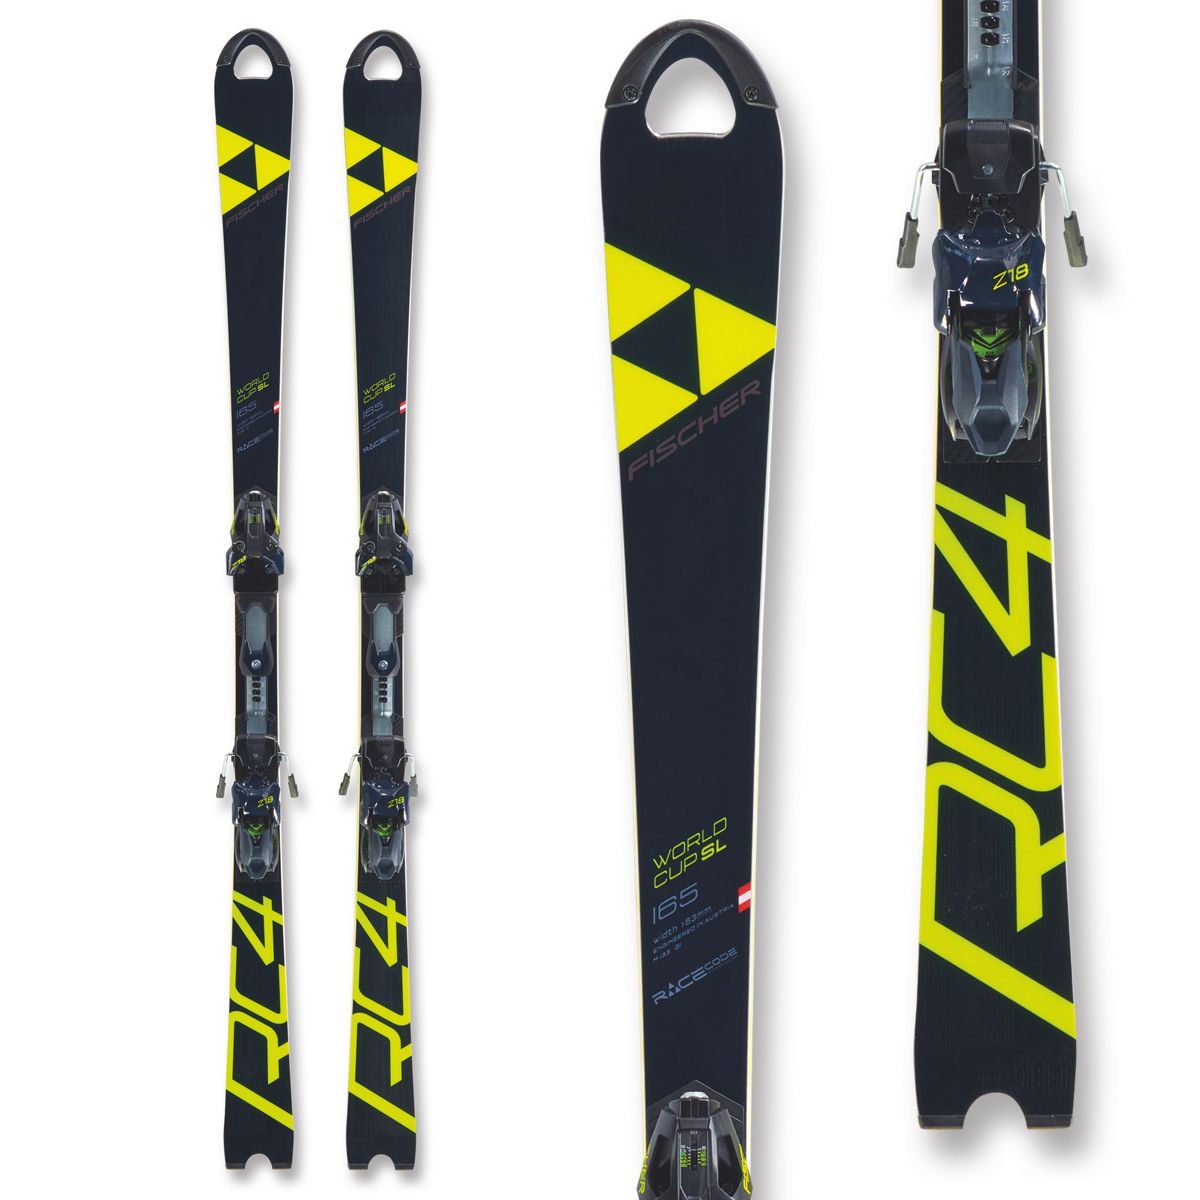 Pack Skis RC4 WORLDCUP SL MEN CURV BOOSTER + Fix Z17